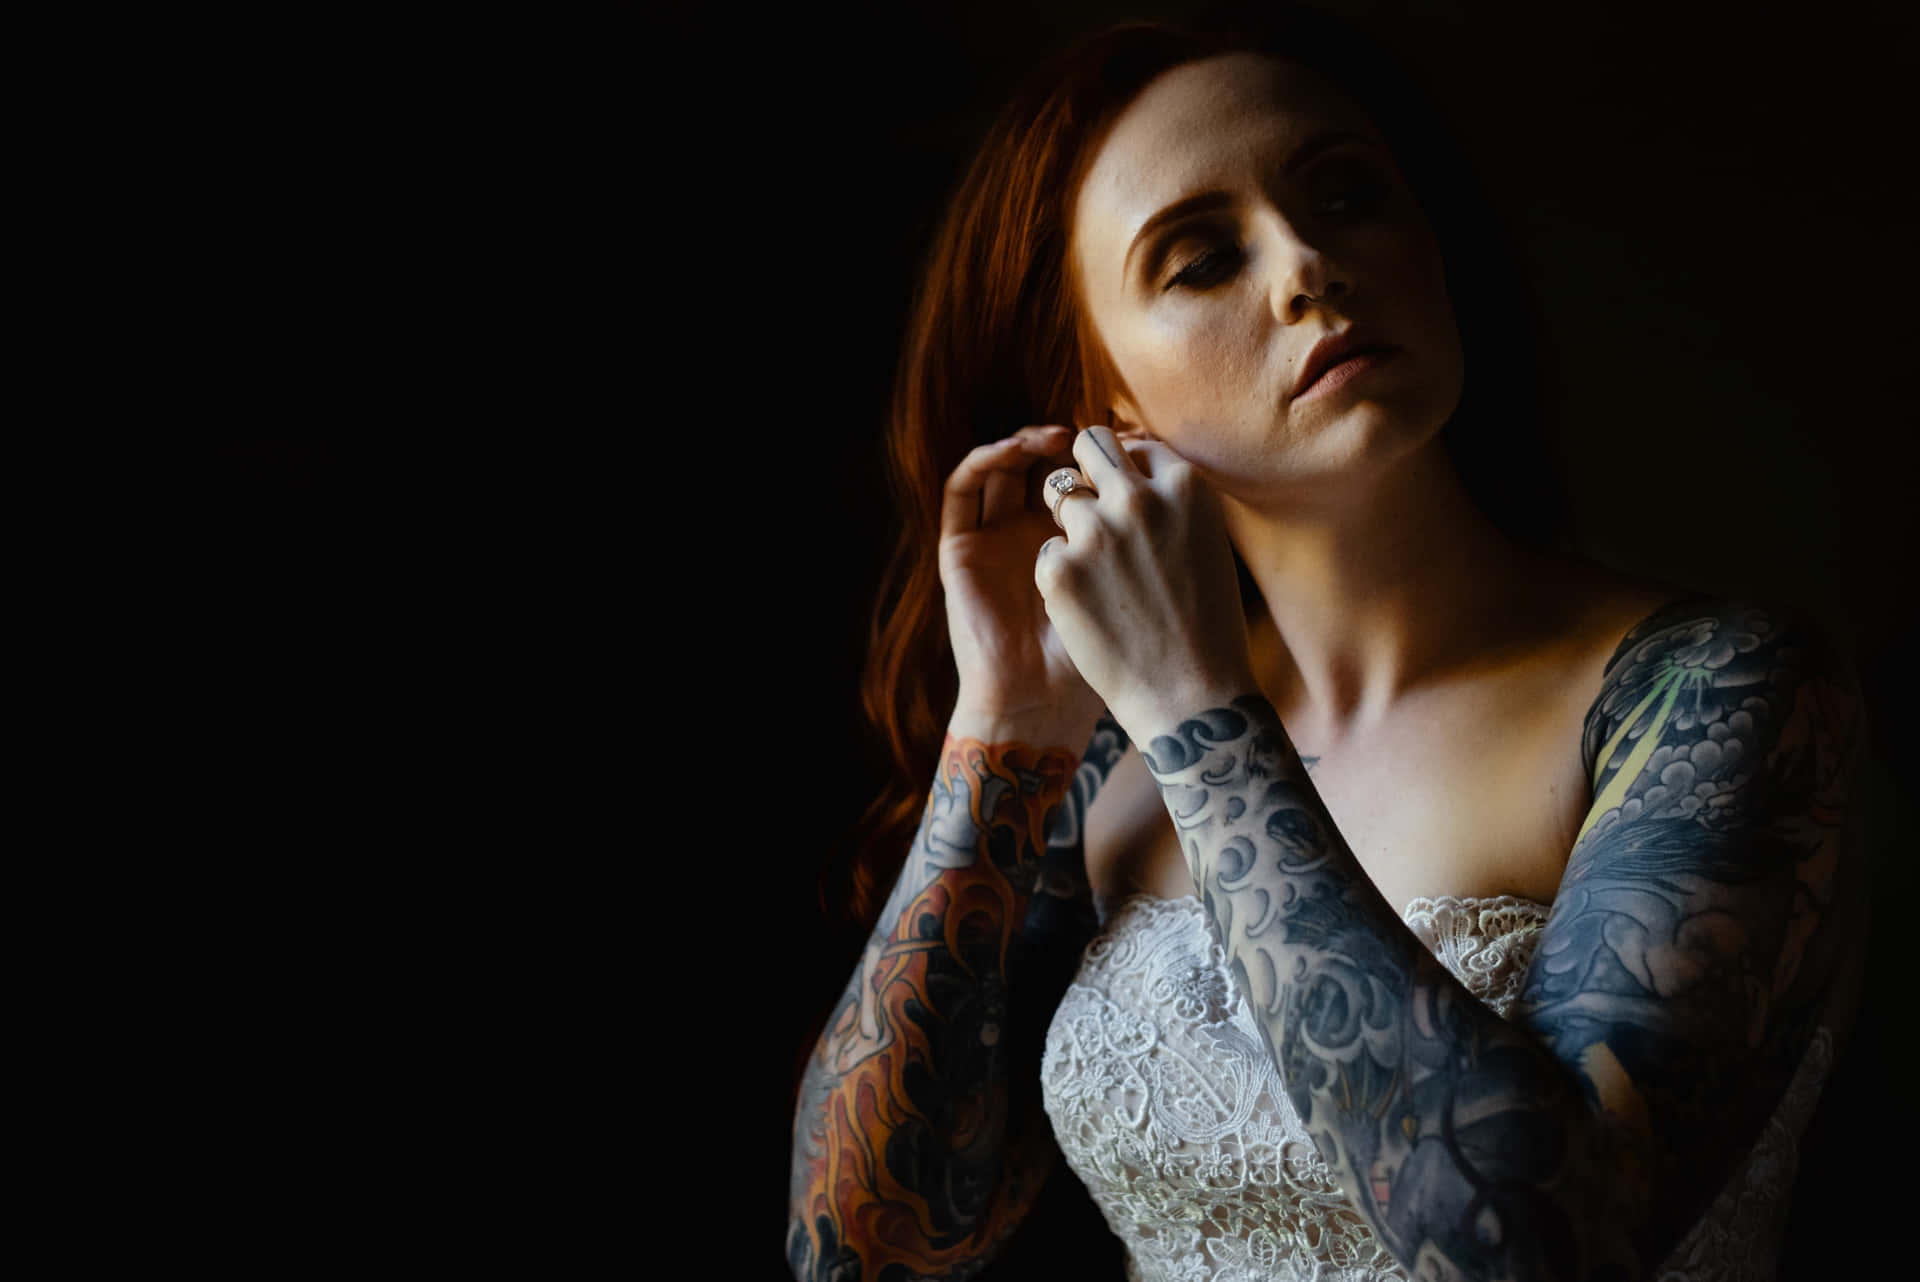 A Woman With Tattoos On Her Arms Is Posing For A Photo